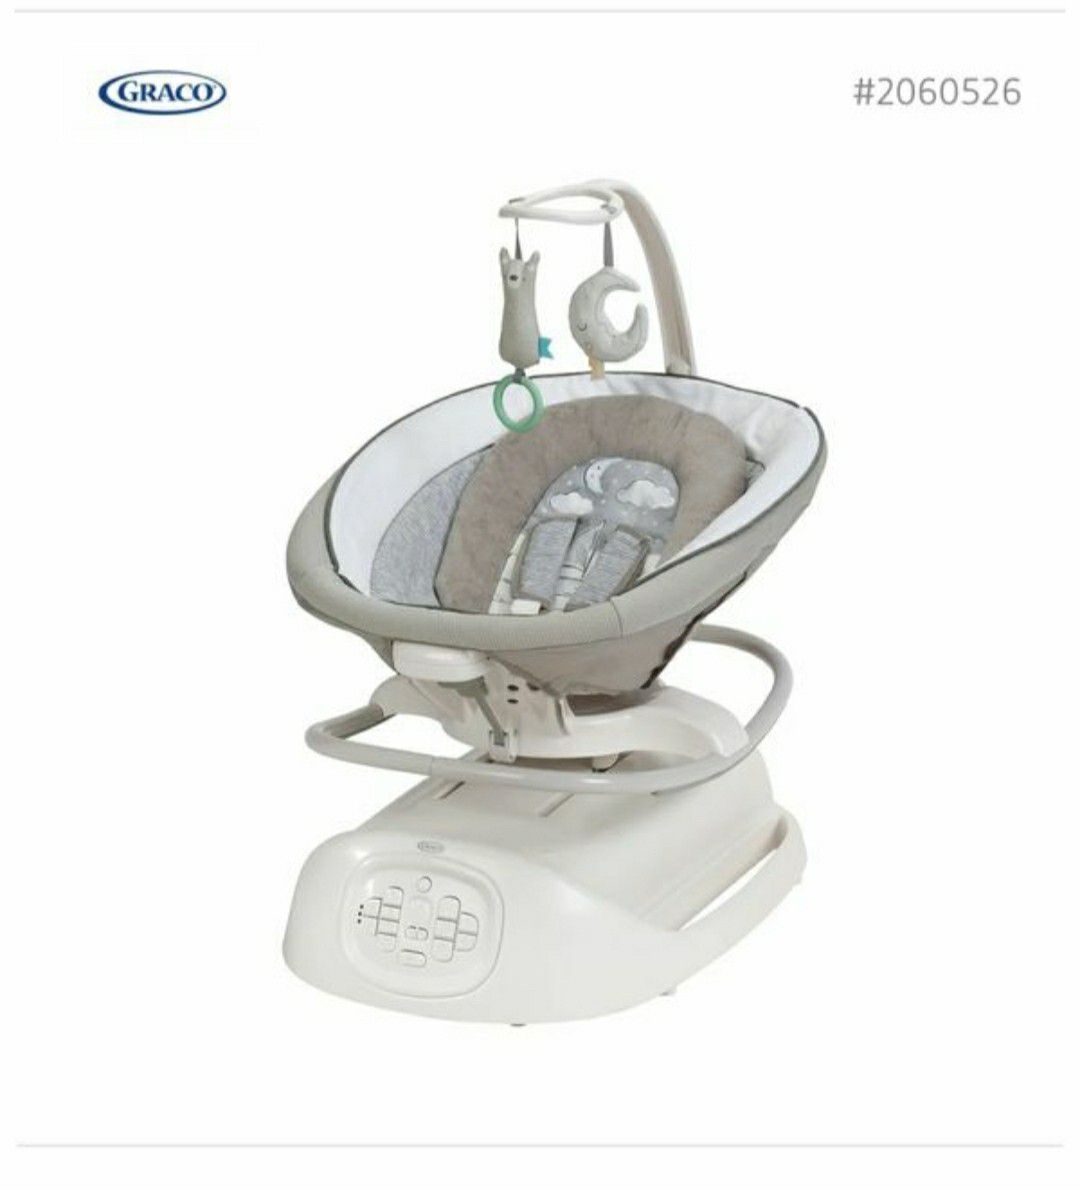 Baby swing in great {url removed} baby didn't use it.PENDING